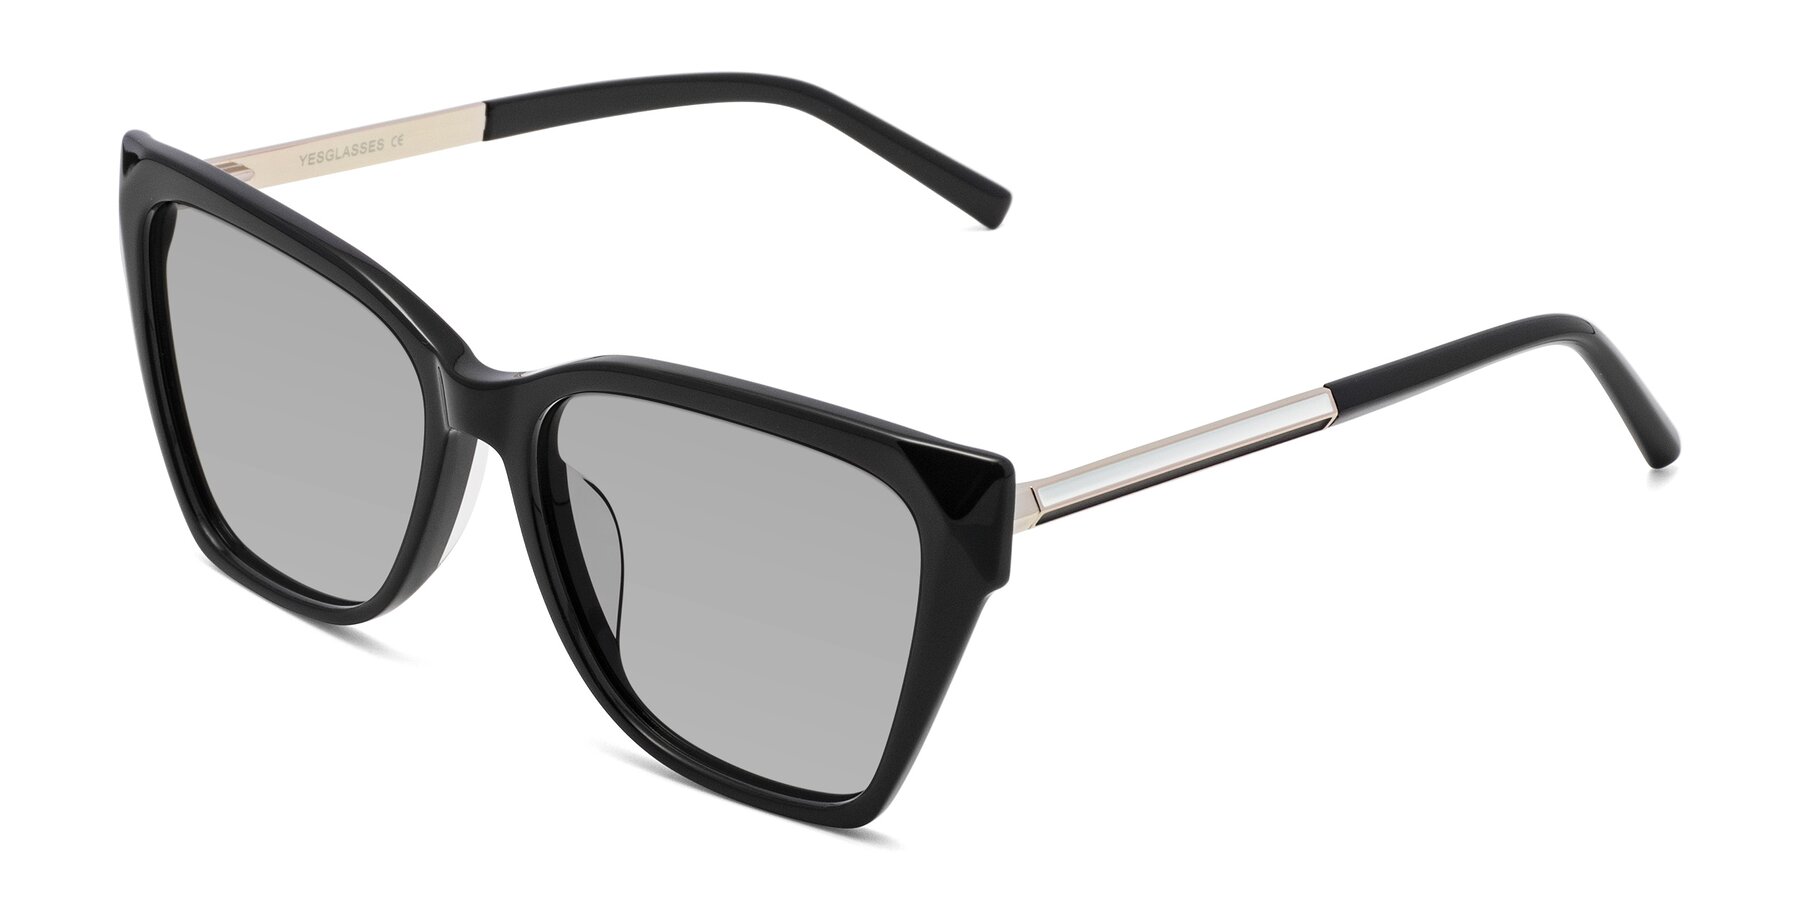 Angle of Swartz in Black with Light Gray Tinted Lenses